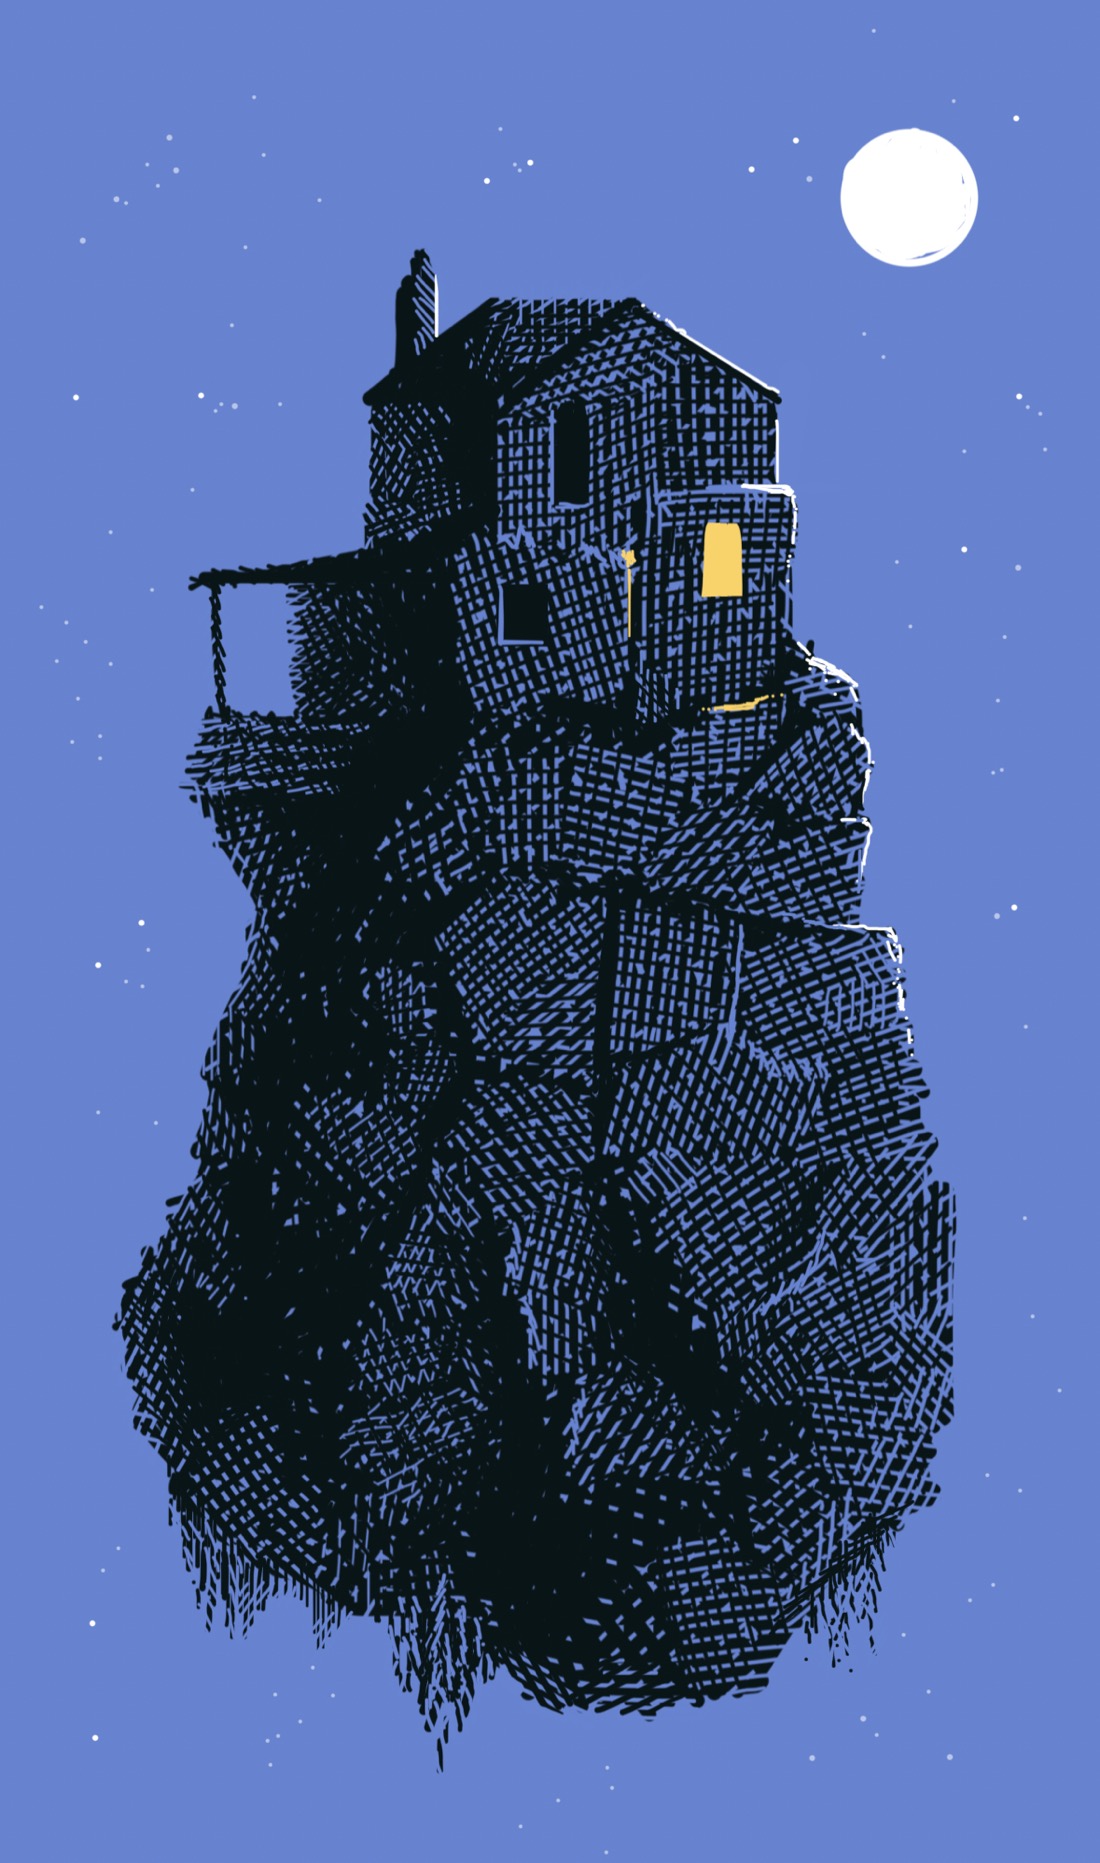 A huge asteroid-like rock hangs suspended in a dark blue starry sky. Built on the top of a rock is a small concrete house that looks a bit slipshod in construction: uneven walls, uneven windows. In the back is a porch with a roof. Hanging from the bottom of the asteroid are what looks like weeds or Spanish moss. In the top right of the sky is a bright, full moon, the white light reflecting off the roof and sides of the house. The house has several windows, most of which are dark, but one of which is lit with bright yellow light. No living things are visible.